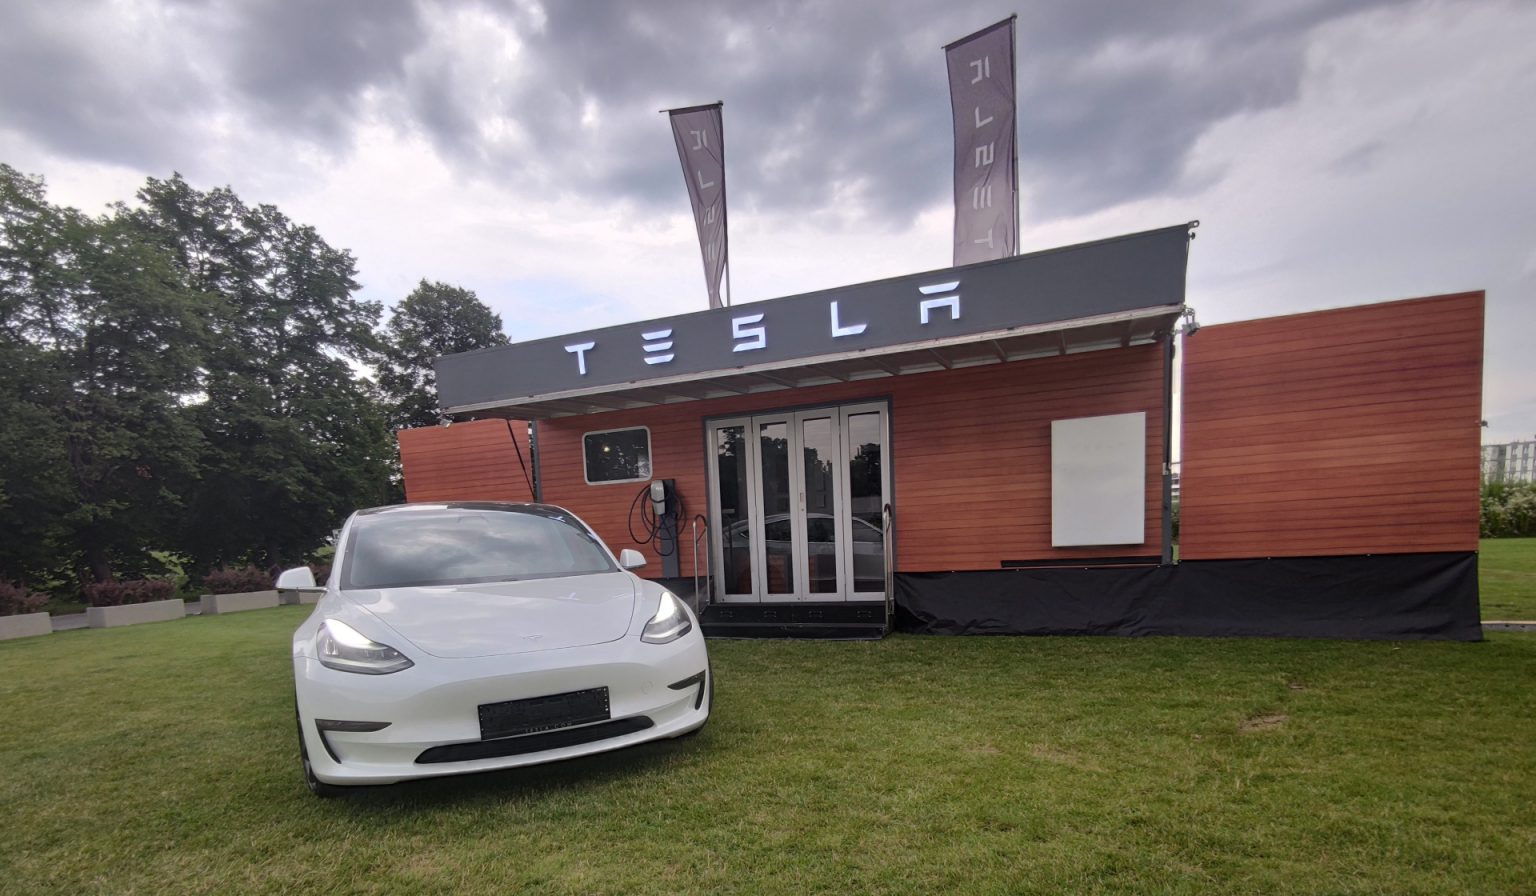 Tesla First Urban-Style Experience Center In Poland As Worldwide Expansion Accelerates